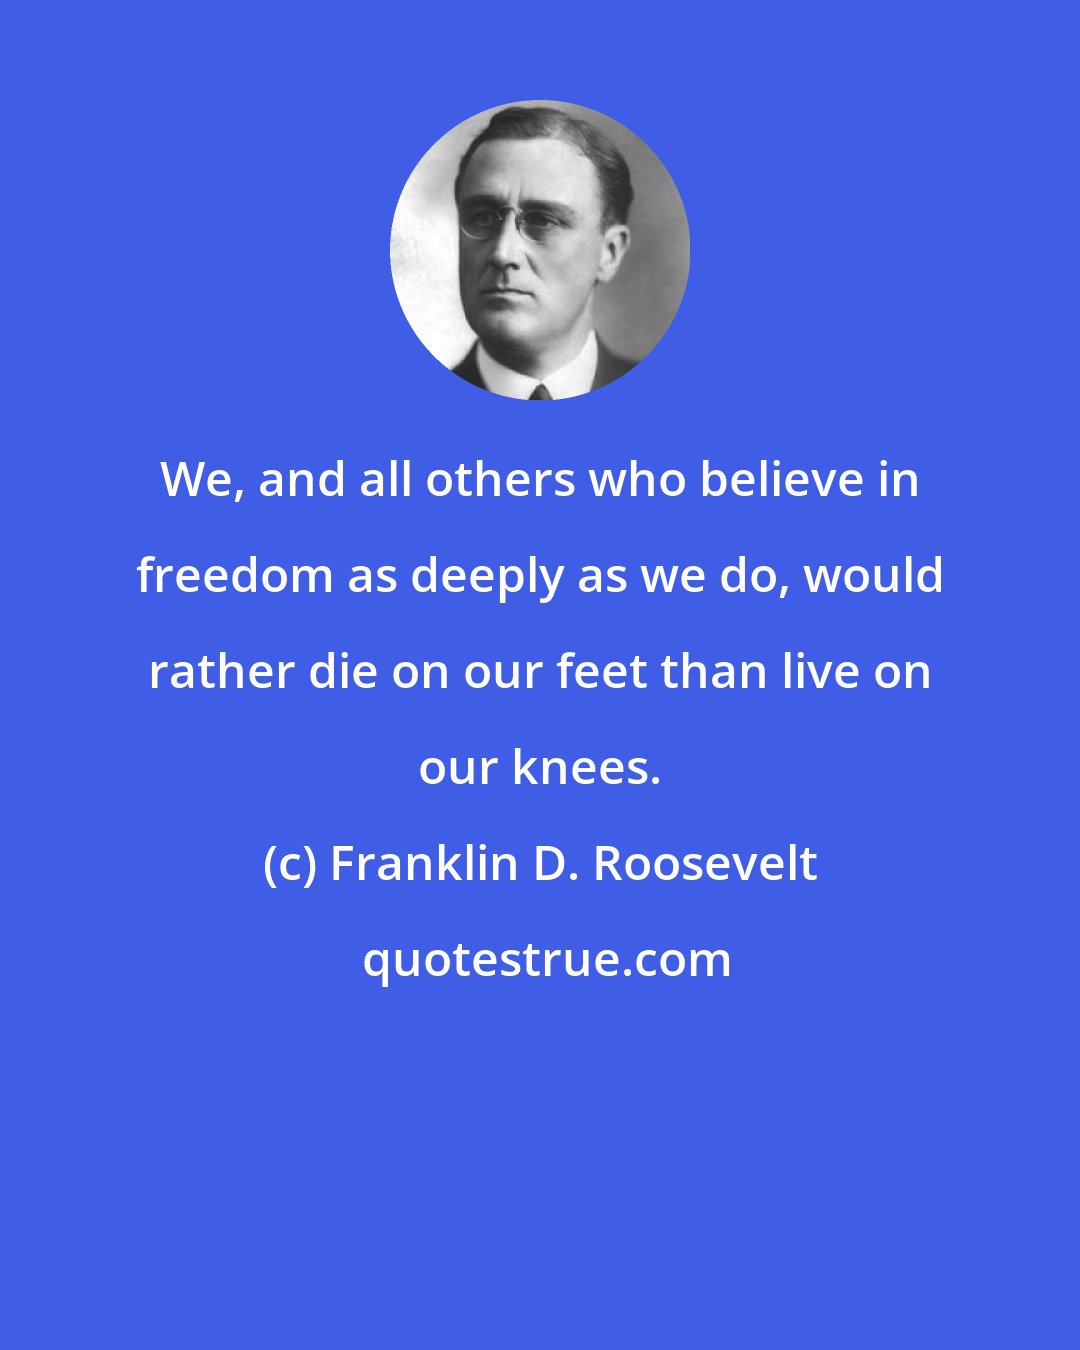 Franklin D. Roosevelt: We, and all others who believe in freedom as deeply as we do, would rather die on our feet than live on our knees.